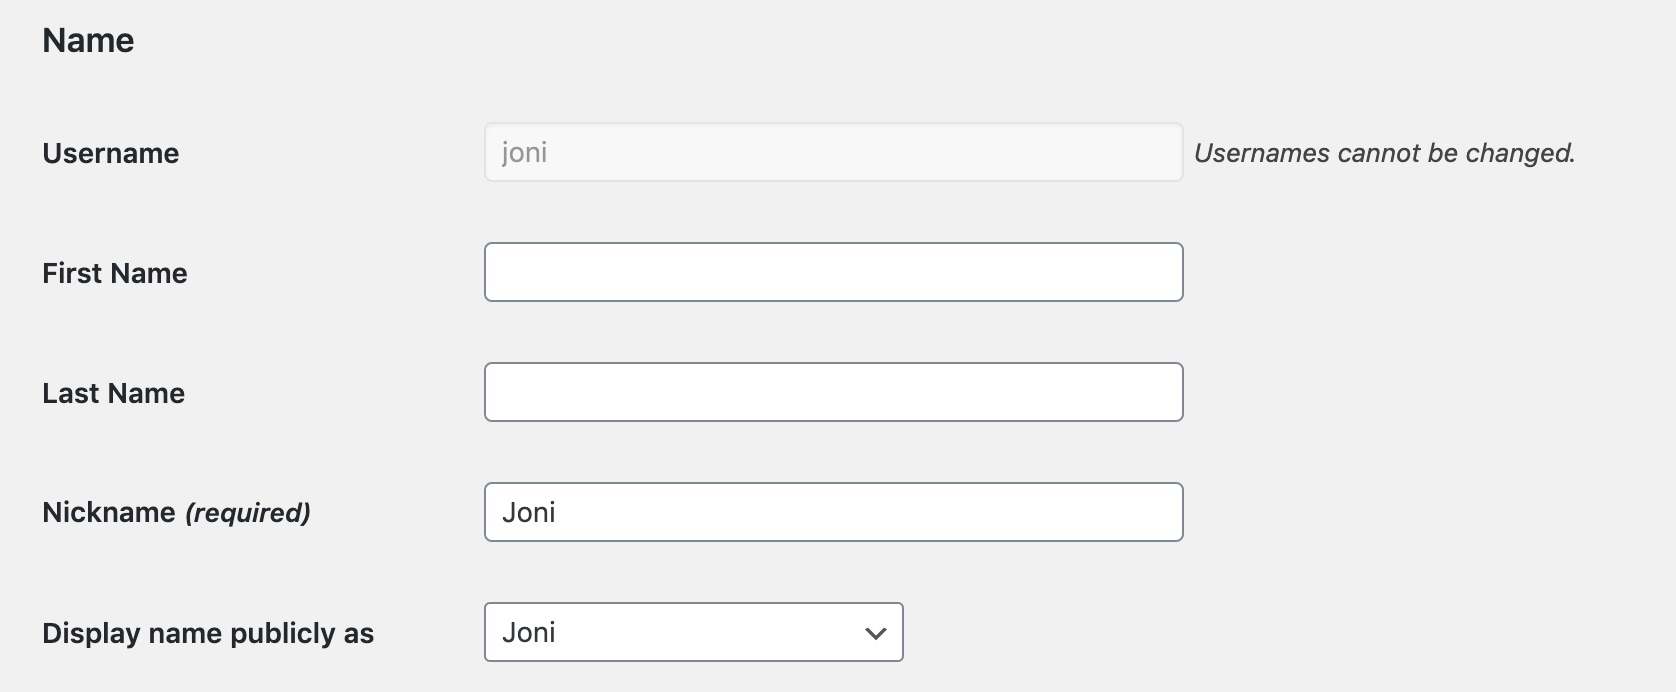 WordPress admin user screen, with the username, first name, last name, and nickname fields. The username and nickname fields are filled out.